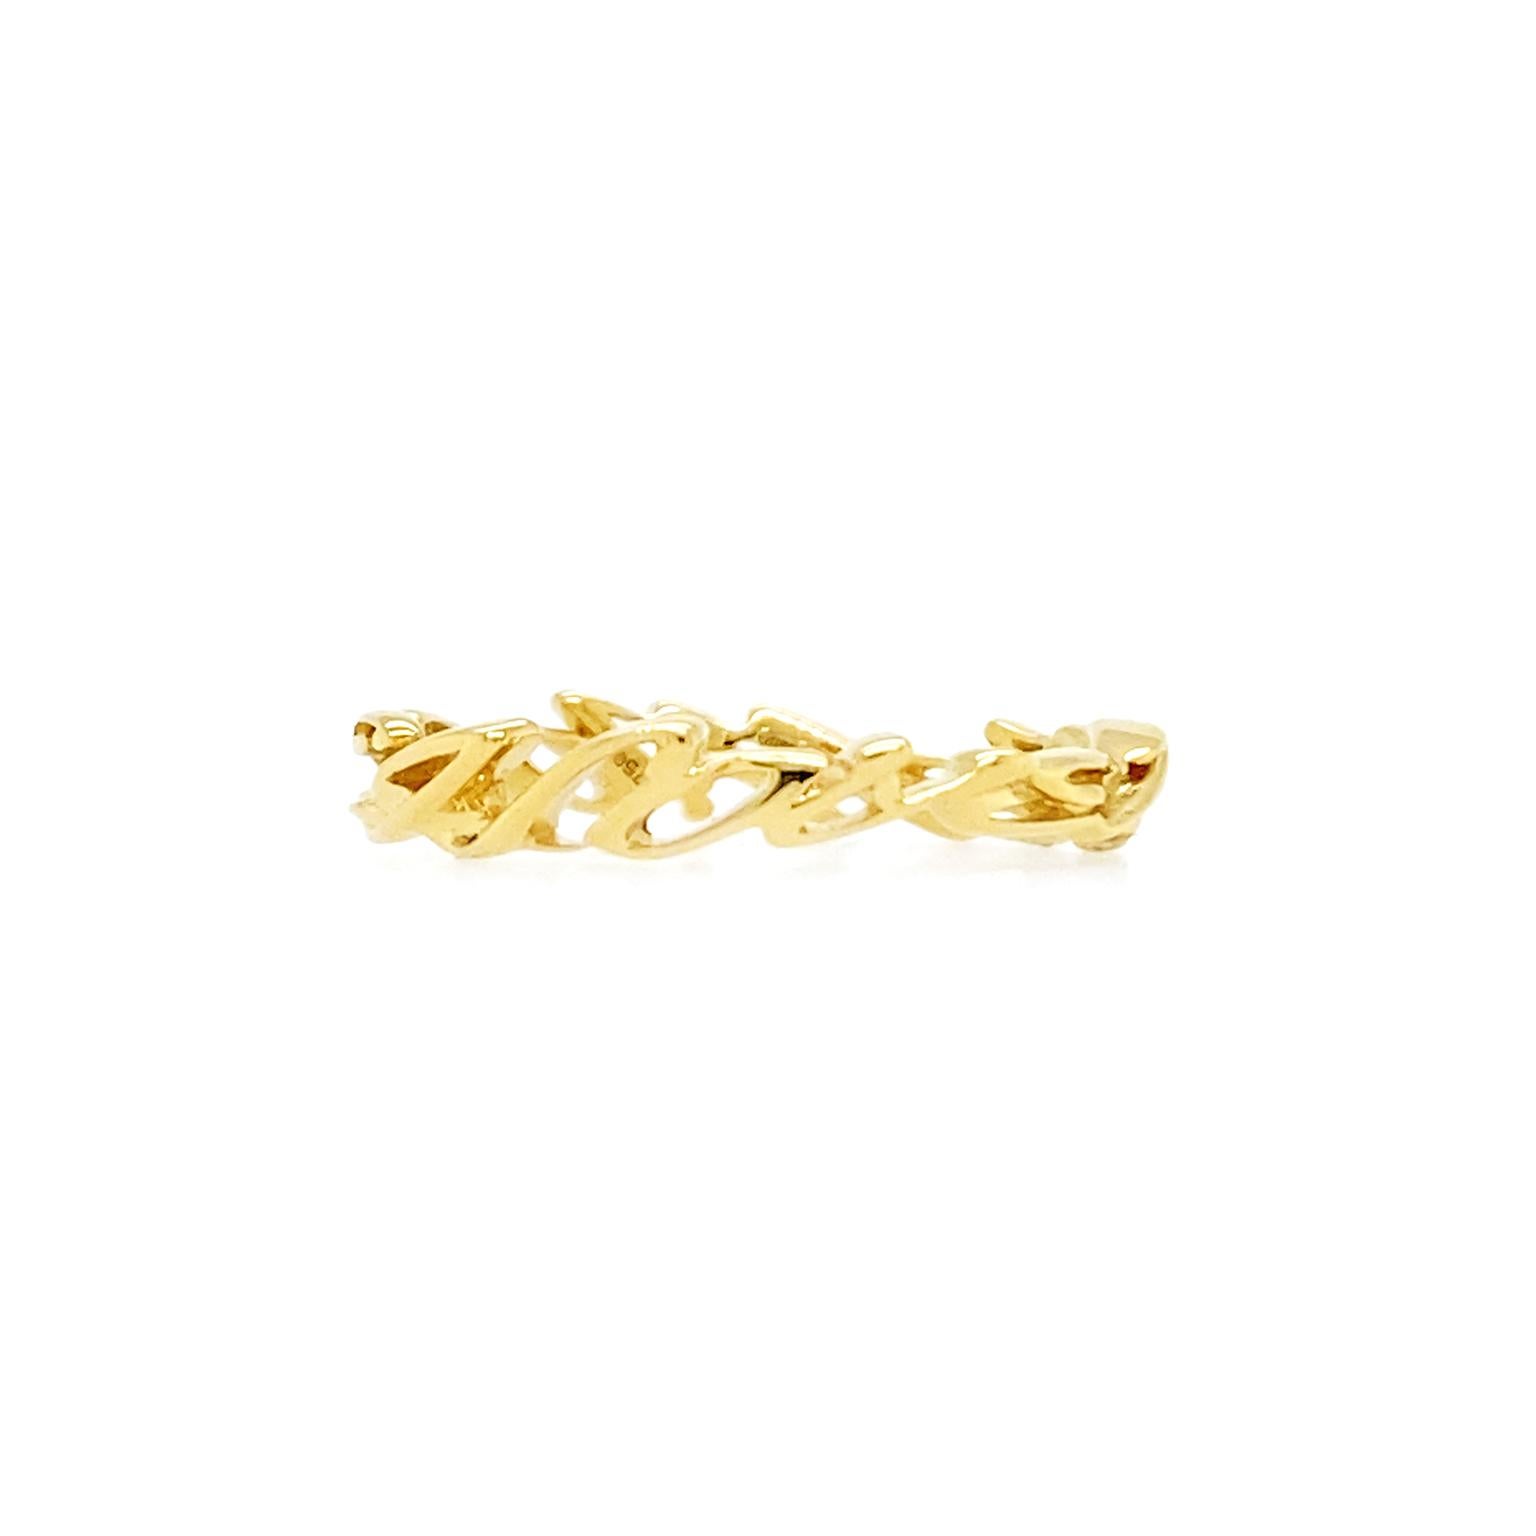 This ring’s statement is small but powerful. Rather than a traditional band, it’s made of cursive block letters 3mm high. Together, they say 'I love me more.' The ring is crafted in 18k yellow gold, prized for its color and ease of shaping. A soft